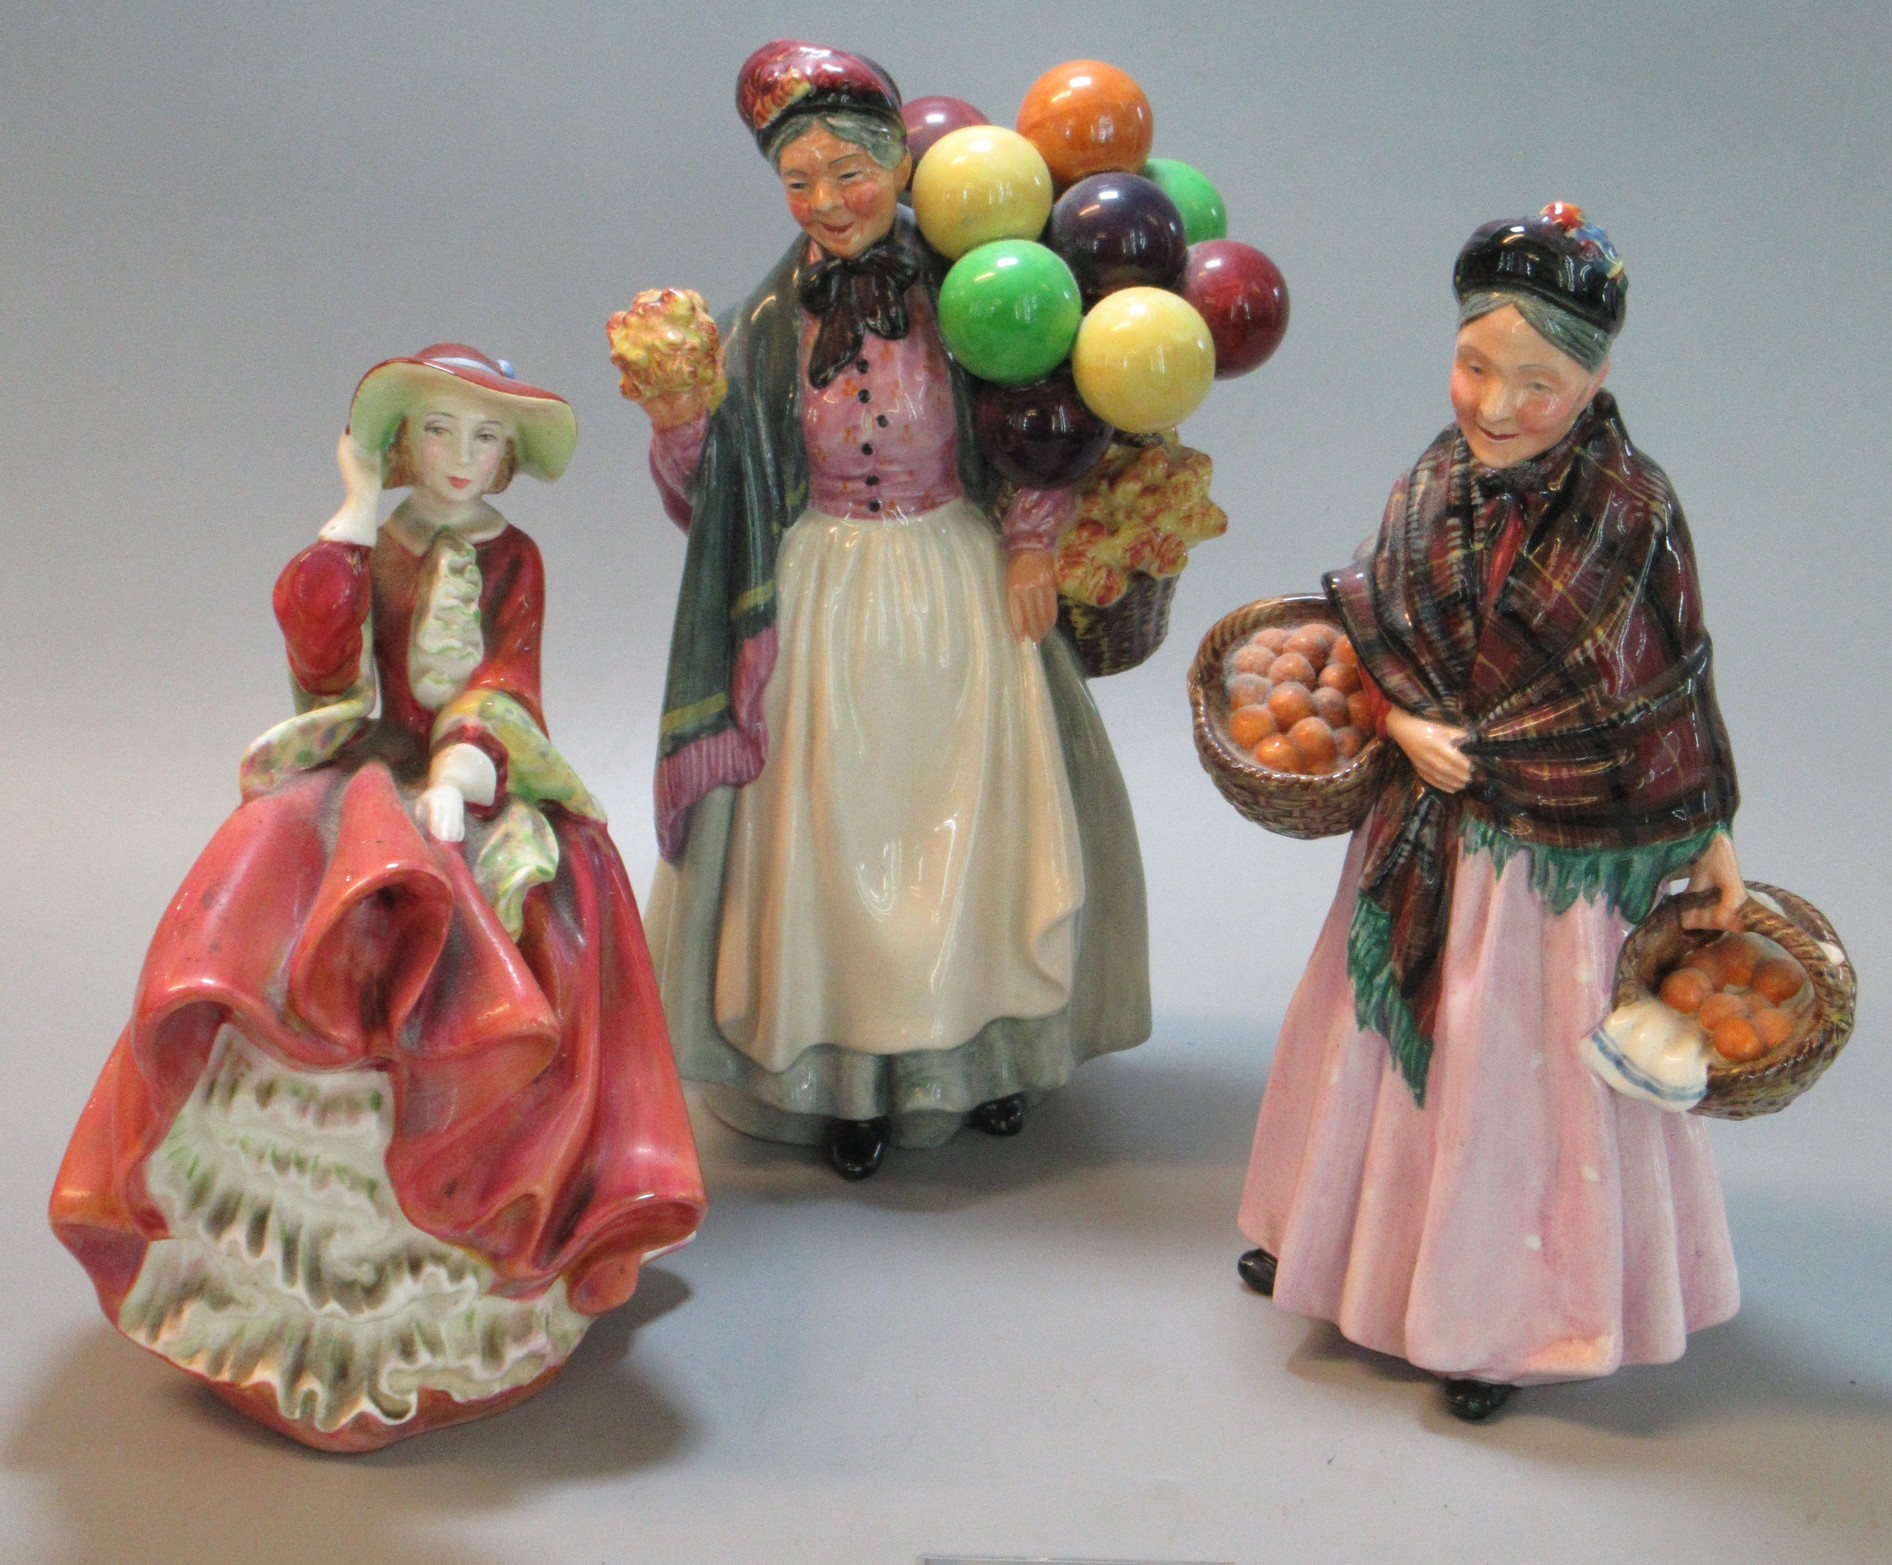 3 Royal Doulton bone china figurines to include, 'Top O' The Hill', 'The Orange Lady' and 'Biddy